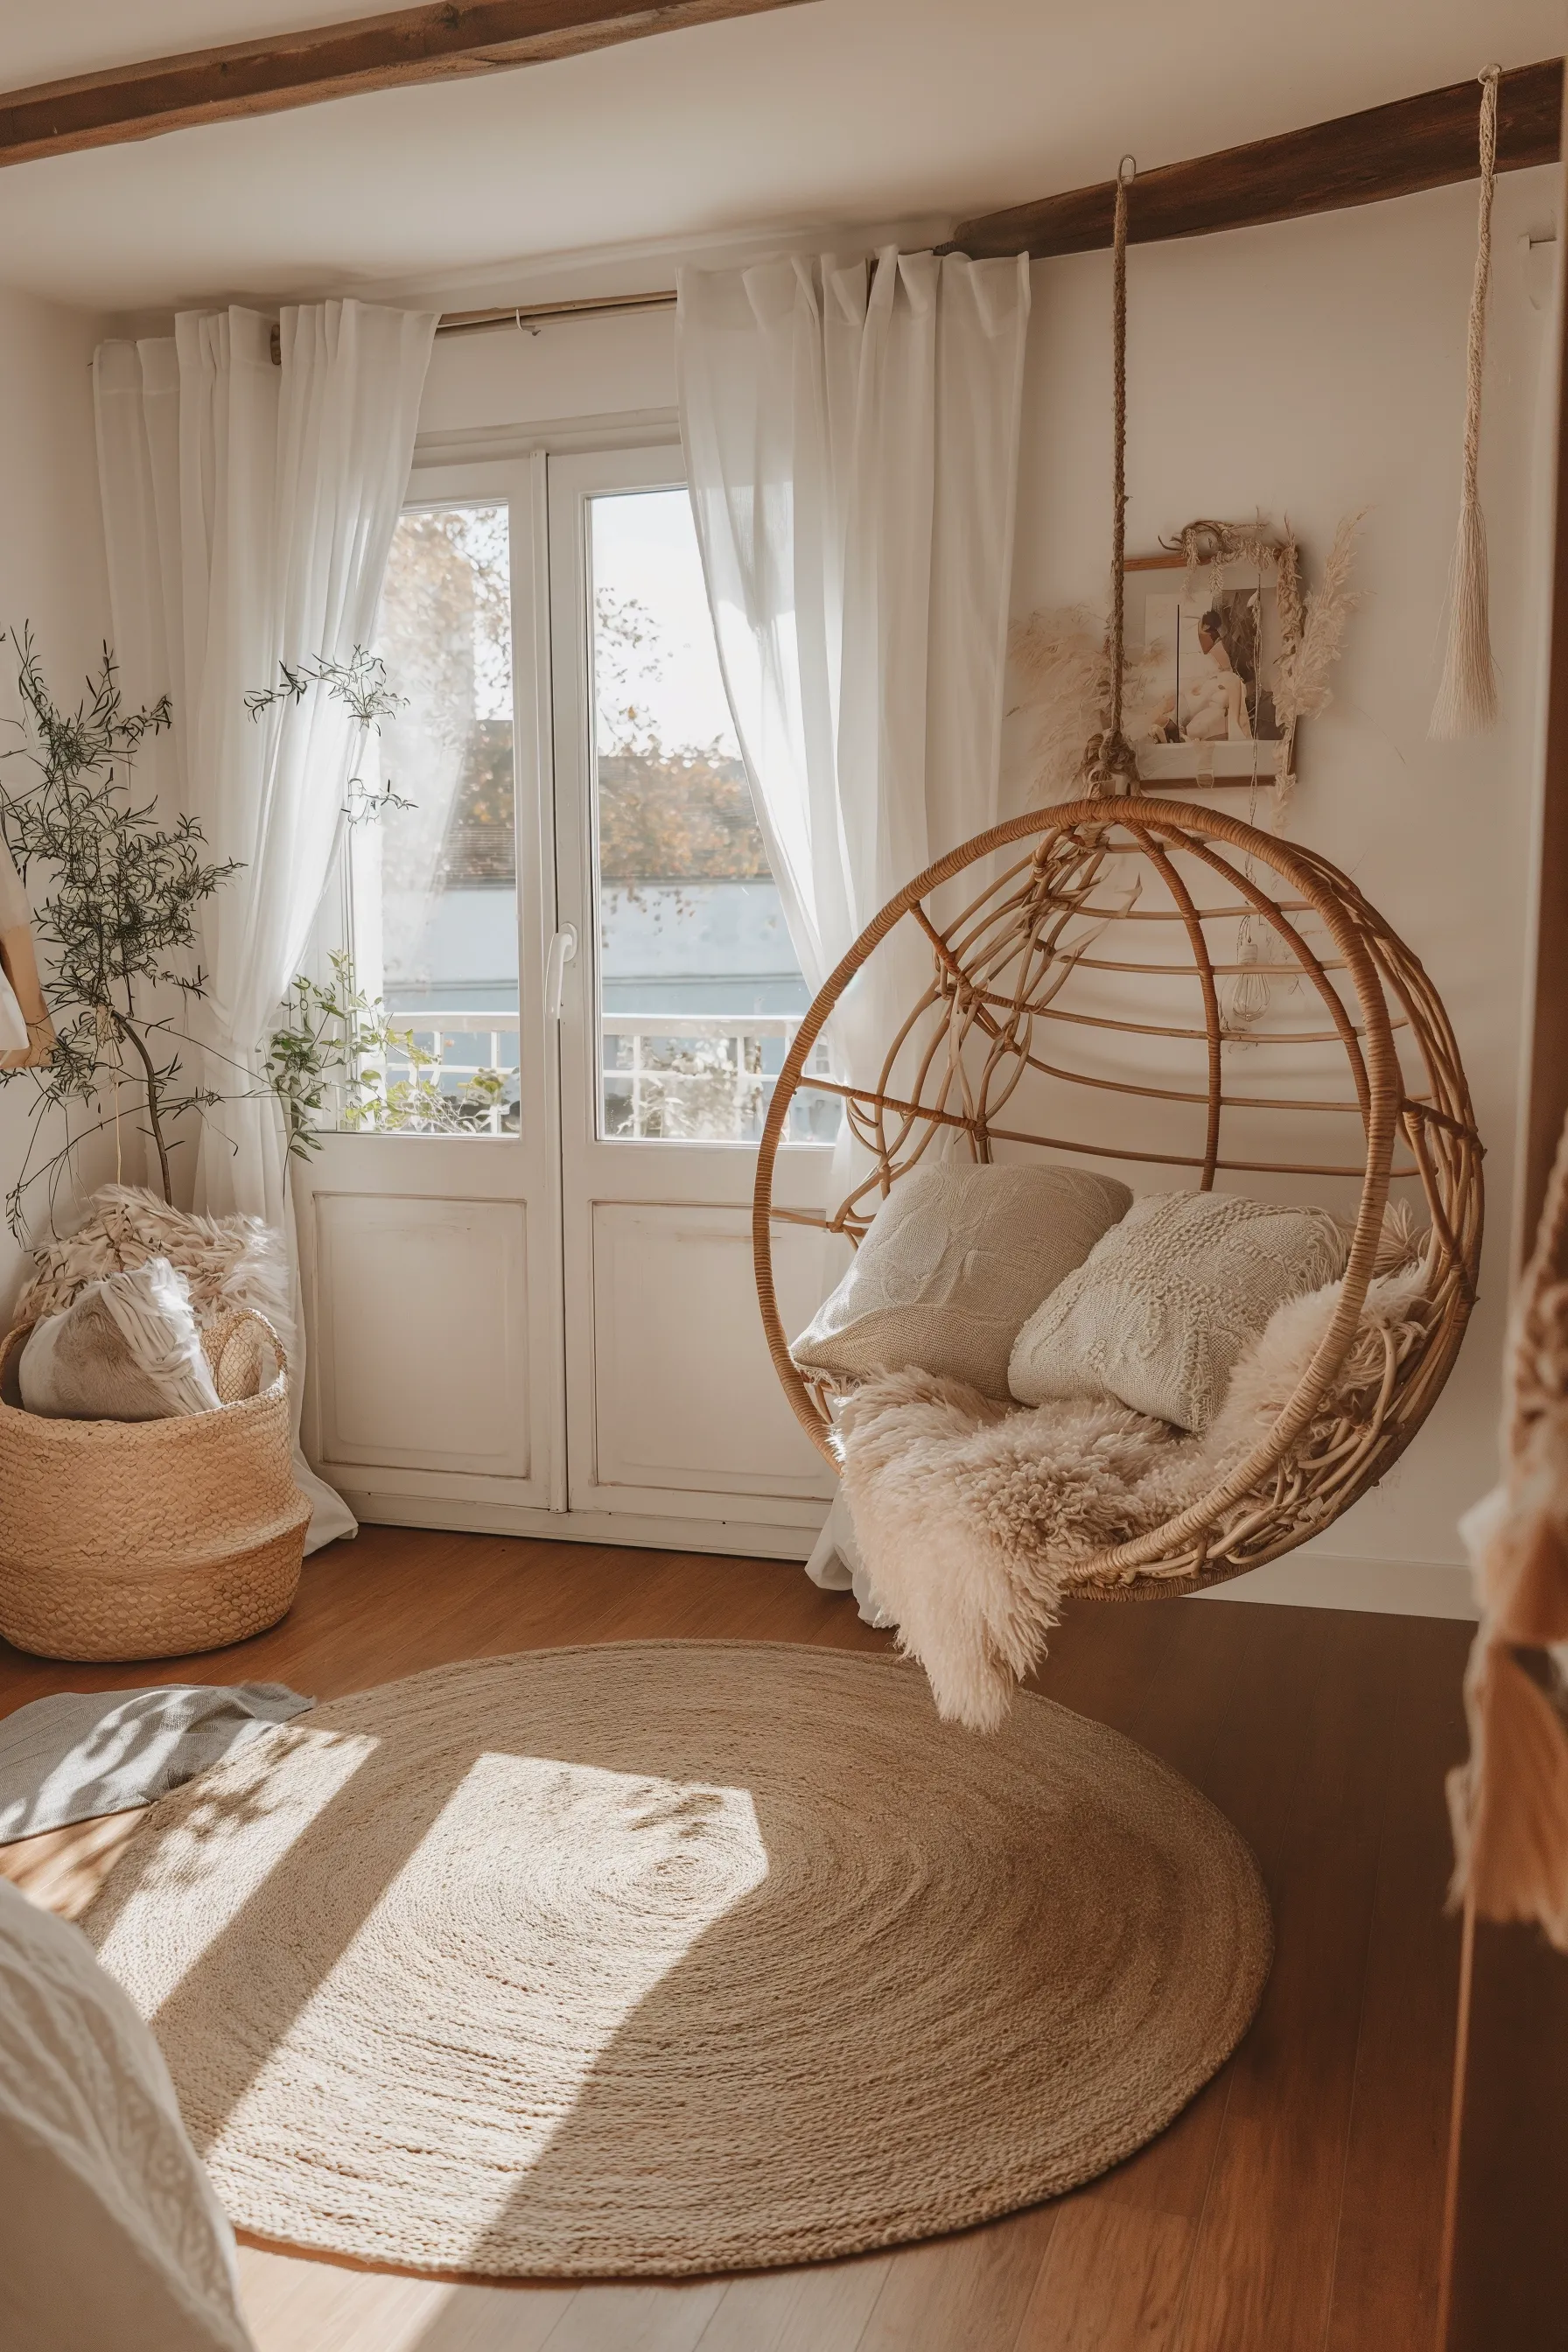 A boho bedroom with an egg chair and woven rug